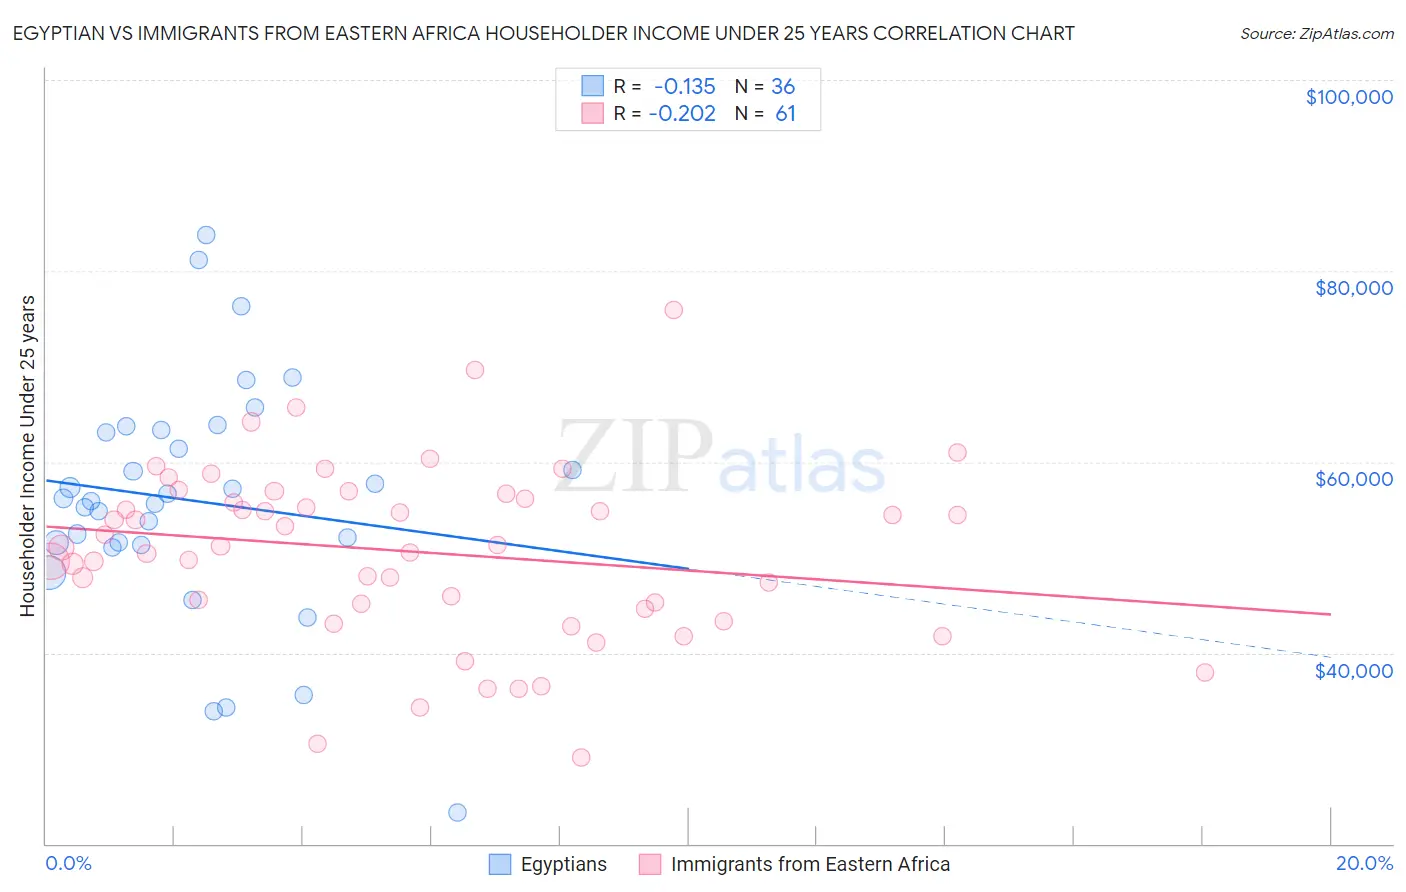 Egyptian vs Immigrants from Eastern Africa Householder Income Under 25 years